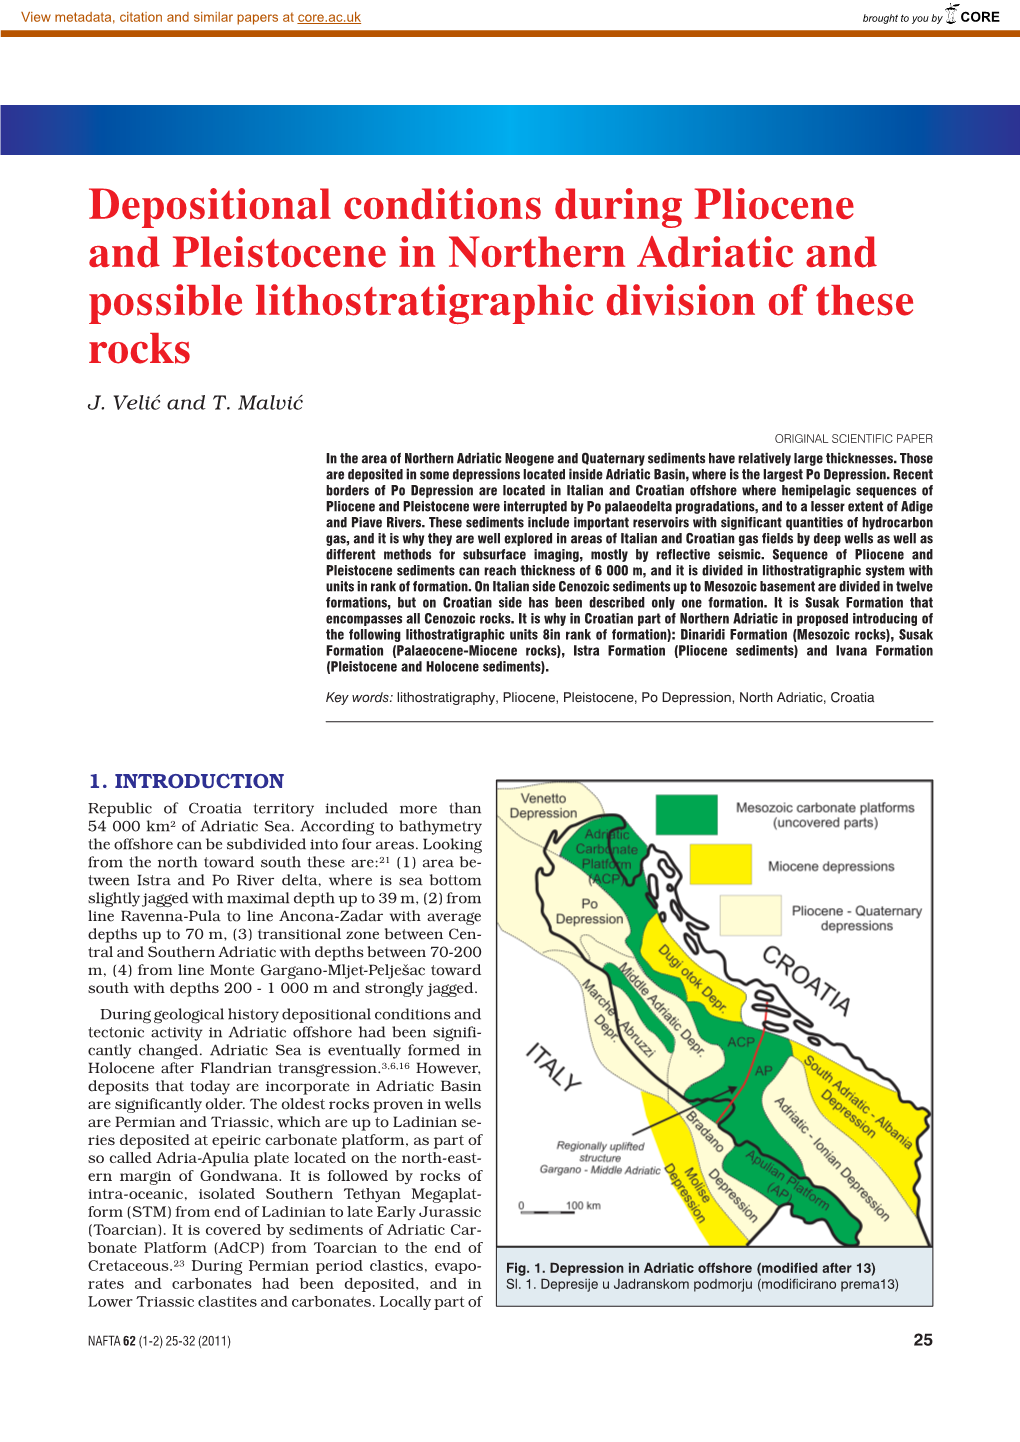 Depositional Conditions During Pliocene and Pleistocene in Northern Adriatic and Possible Lithostratigraphic Division of These Rocks J